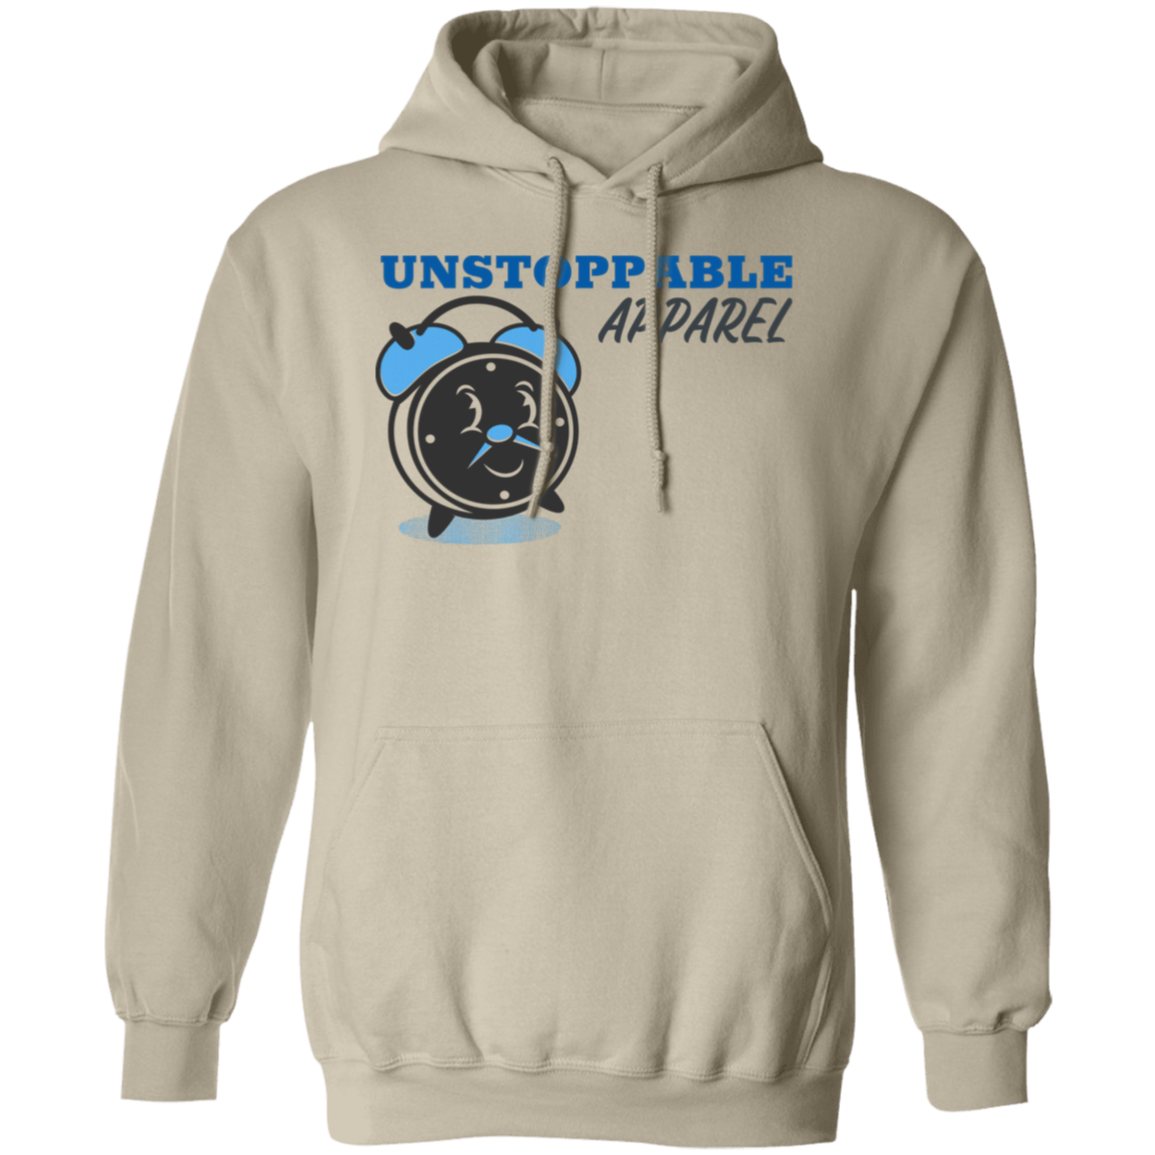 UNSTOPPABLE APPAREL